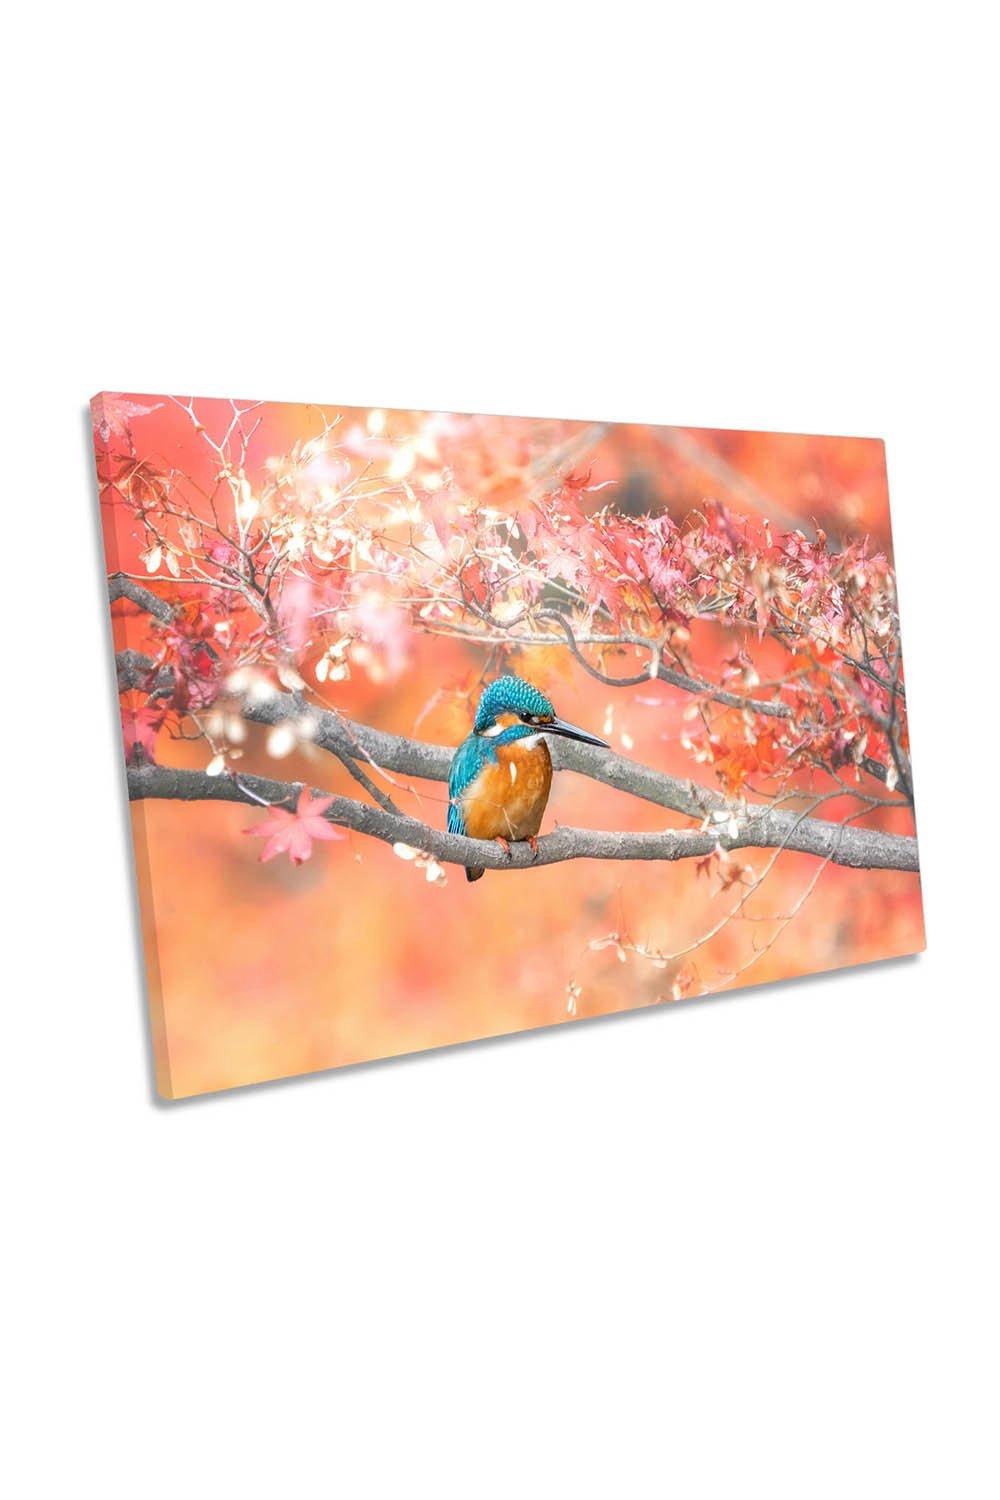 Kingfisher Bird Pink Autumn Leaves Canvas Wall Art Picture Print